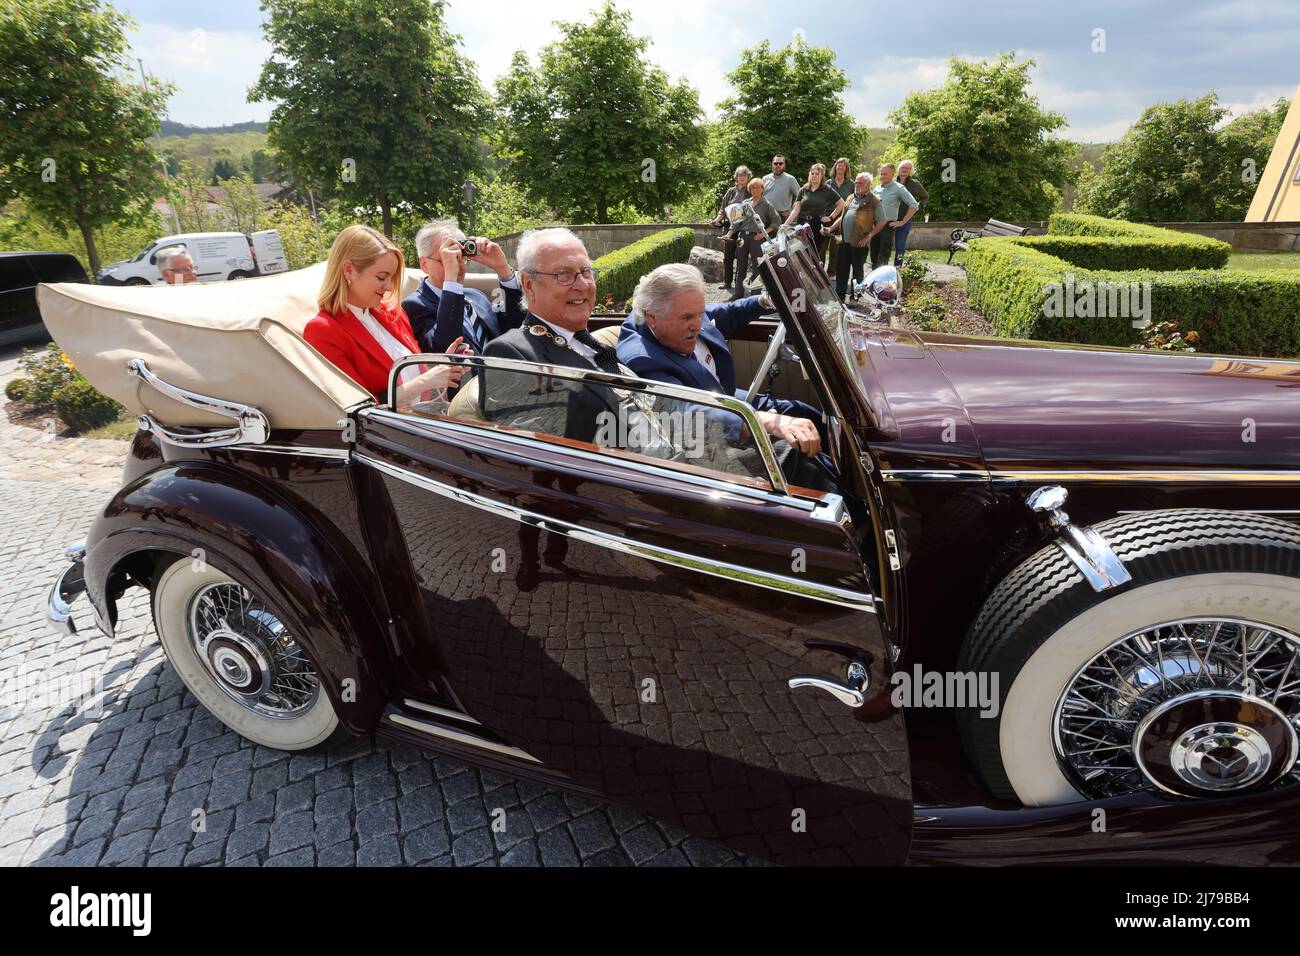 07 May 2022, Saxony-Anhalt, Ballenstedt: Eduard Prince von Anhalt drives up in a vehicle. He celebrates his 80th birthday in Ballenstedt. At the same time also the Investitur took place. In the context of the Investitur annually persons for special achievements of the Askanischen house order "Albrecht the bear" are honored. The investiture takes place in the presence of Eduard Prince of Anhalt. Photo: Matthias Bein/dpa-Zentralbild/ZB Stock Photo